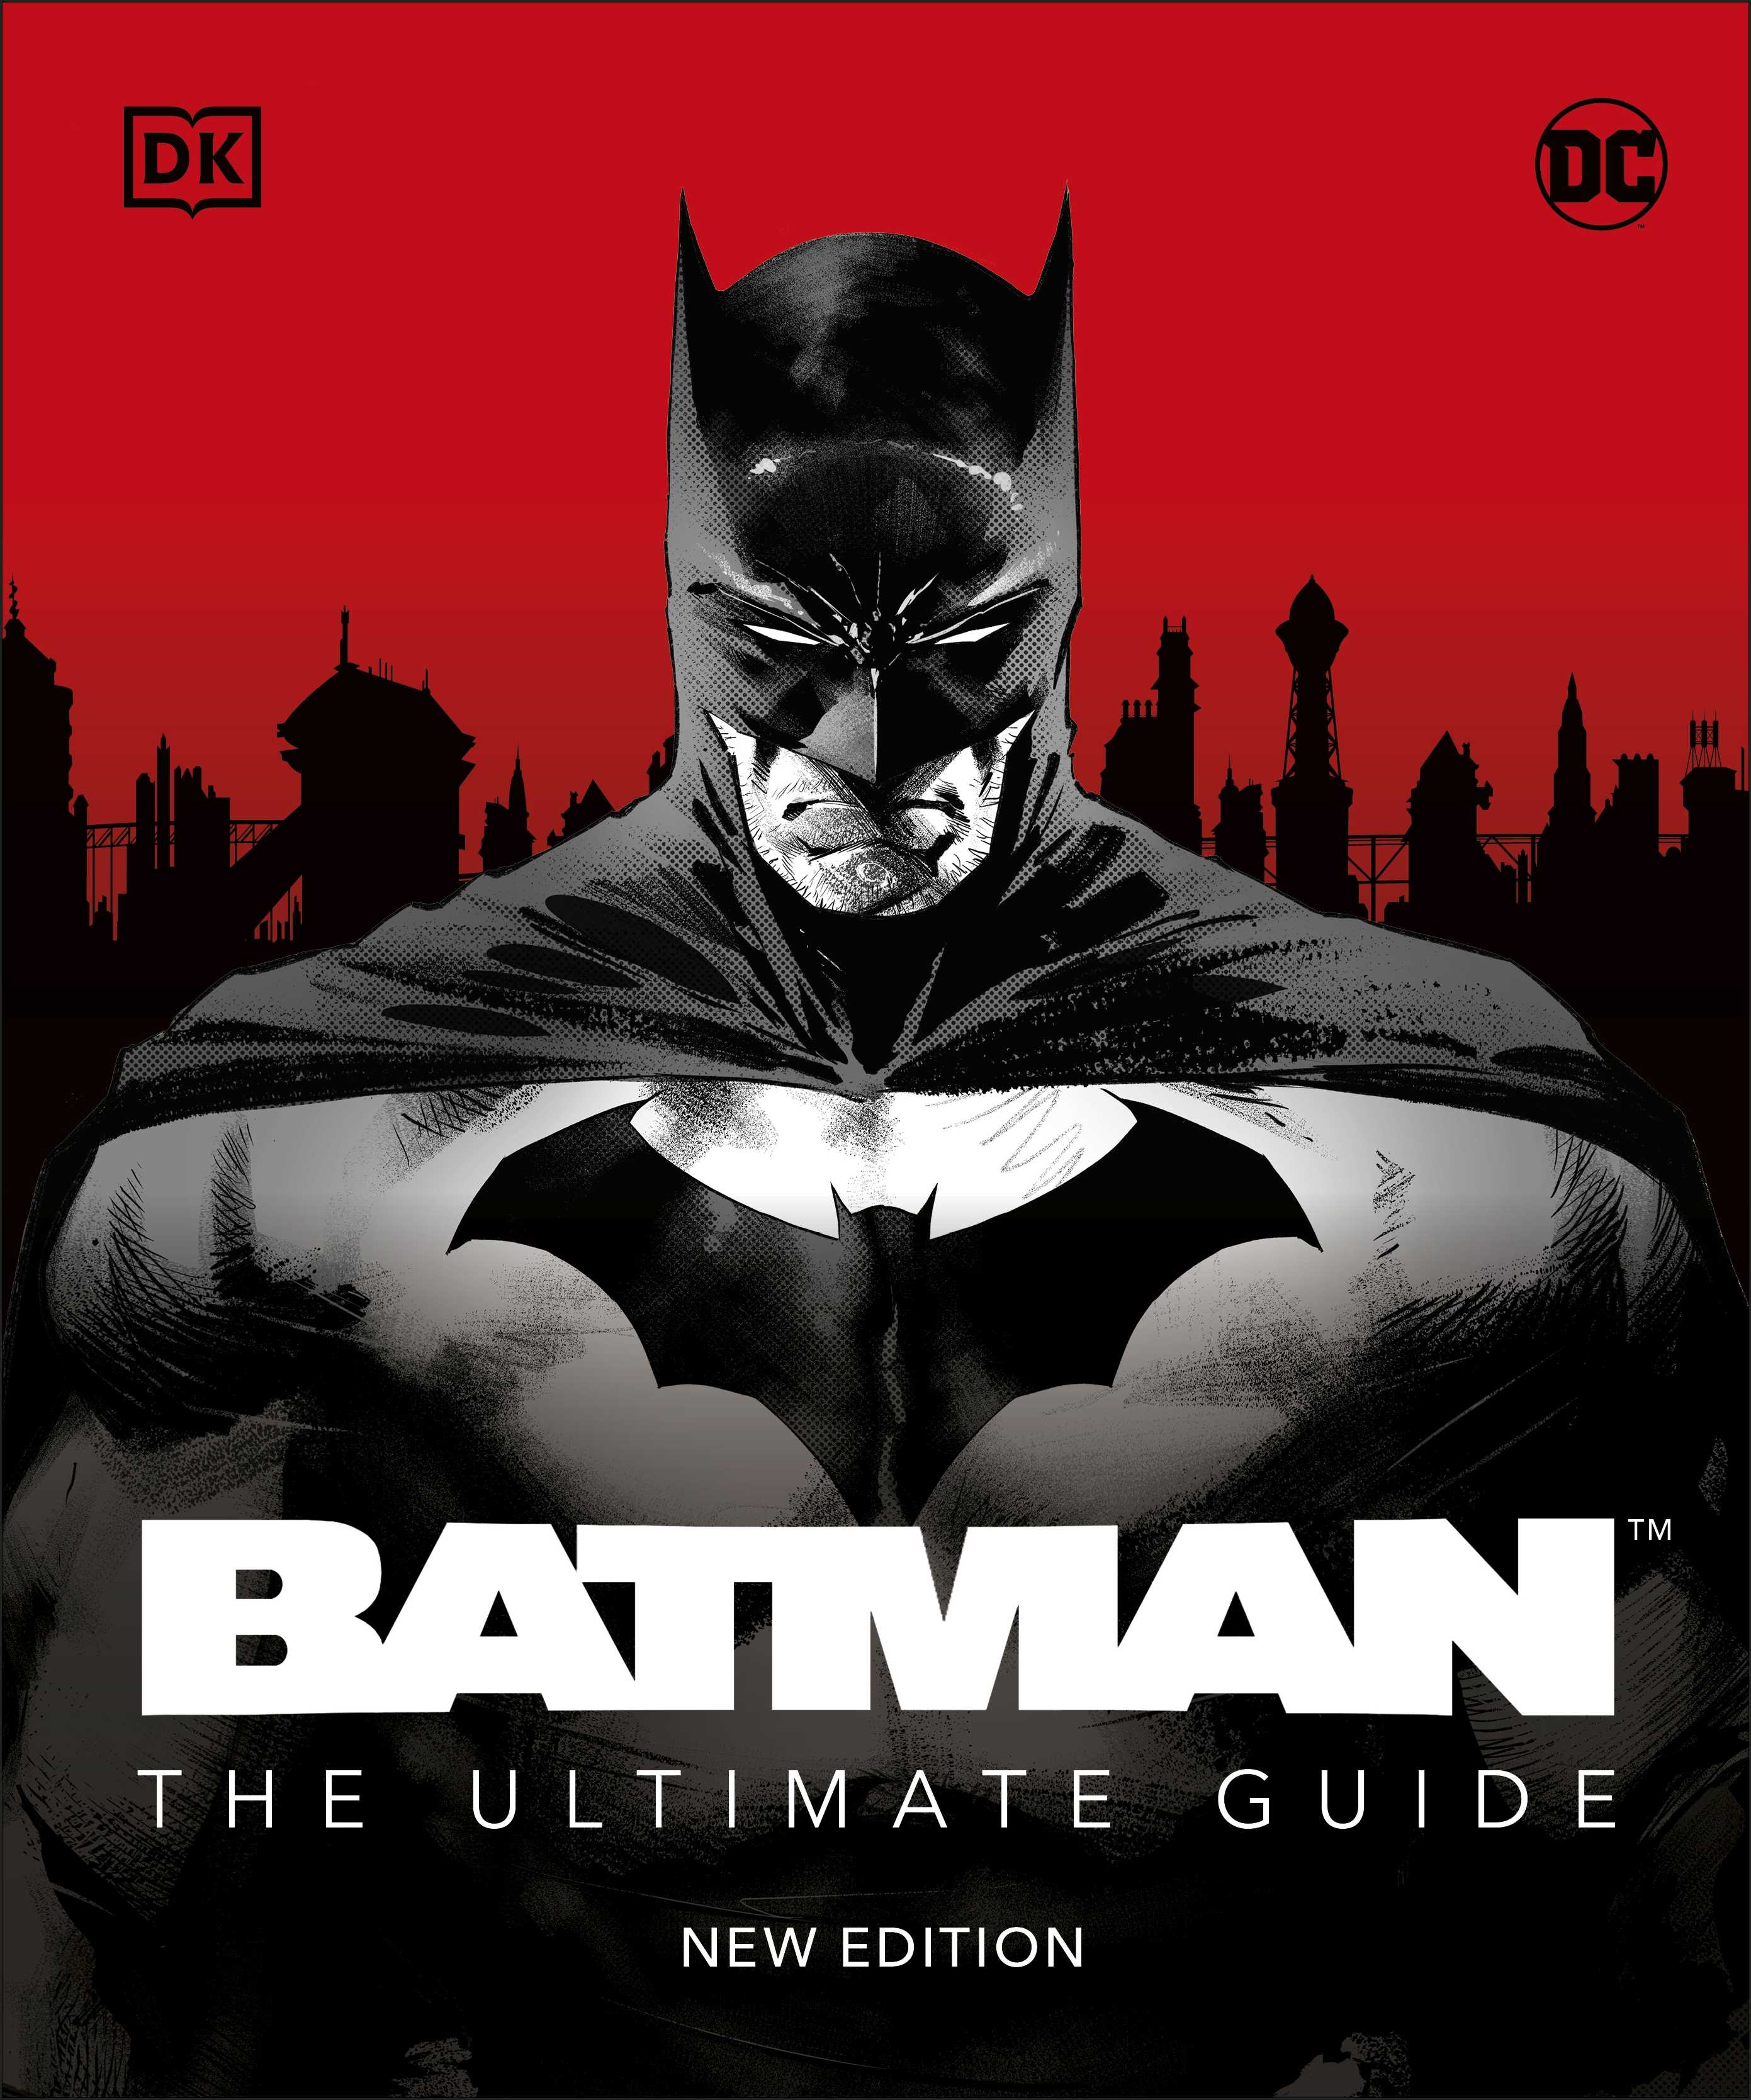 Batman The Ultimate Guide (New Edition)